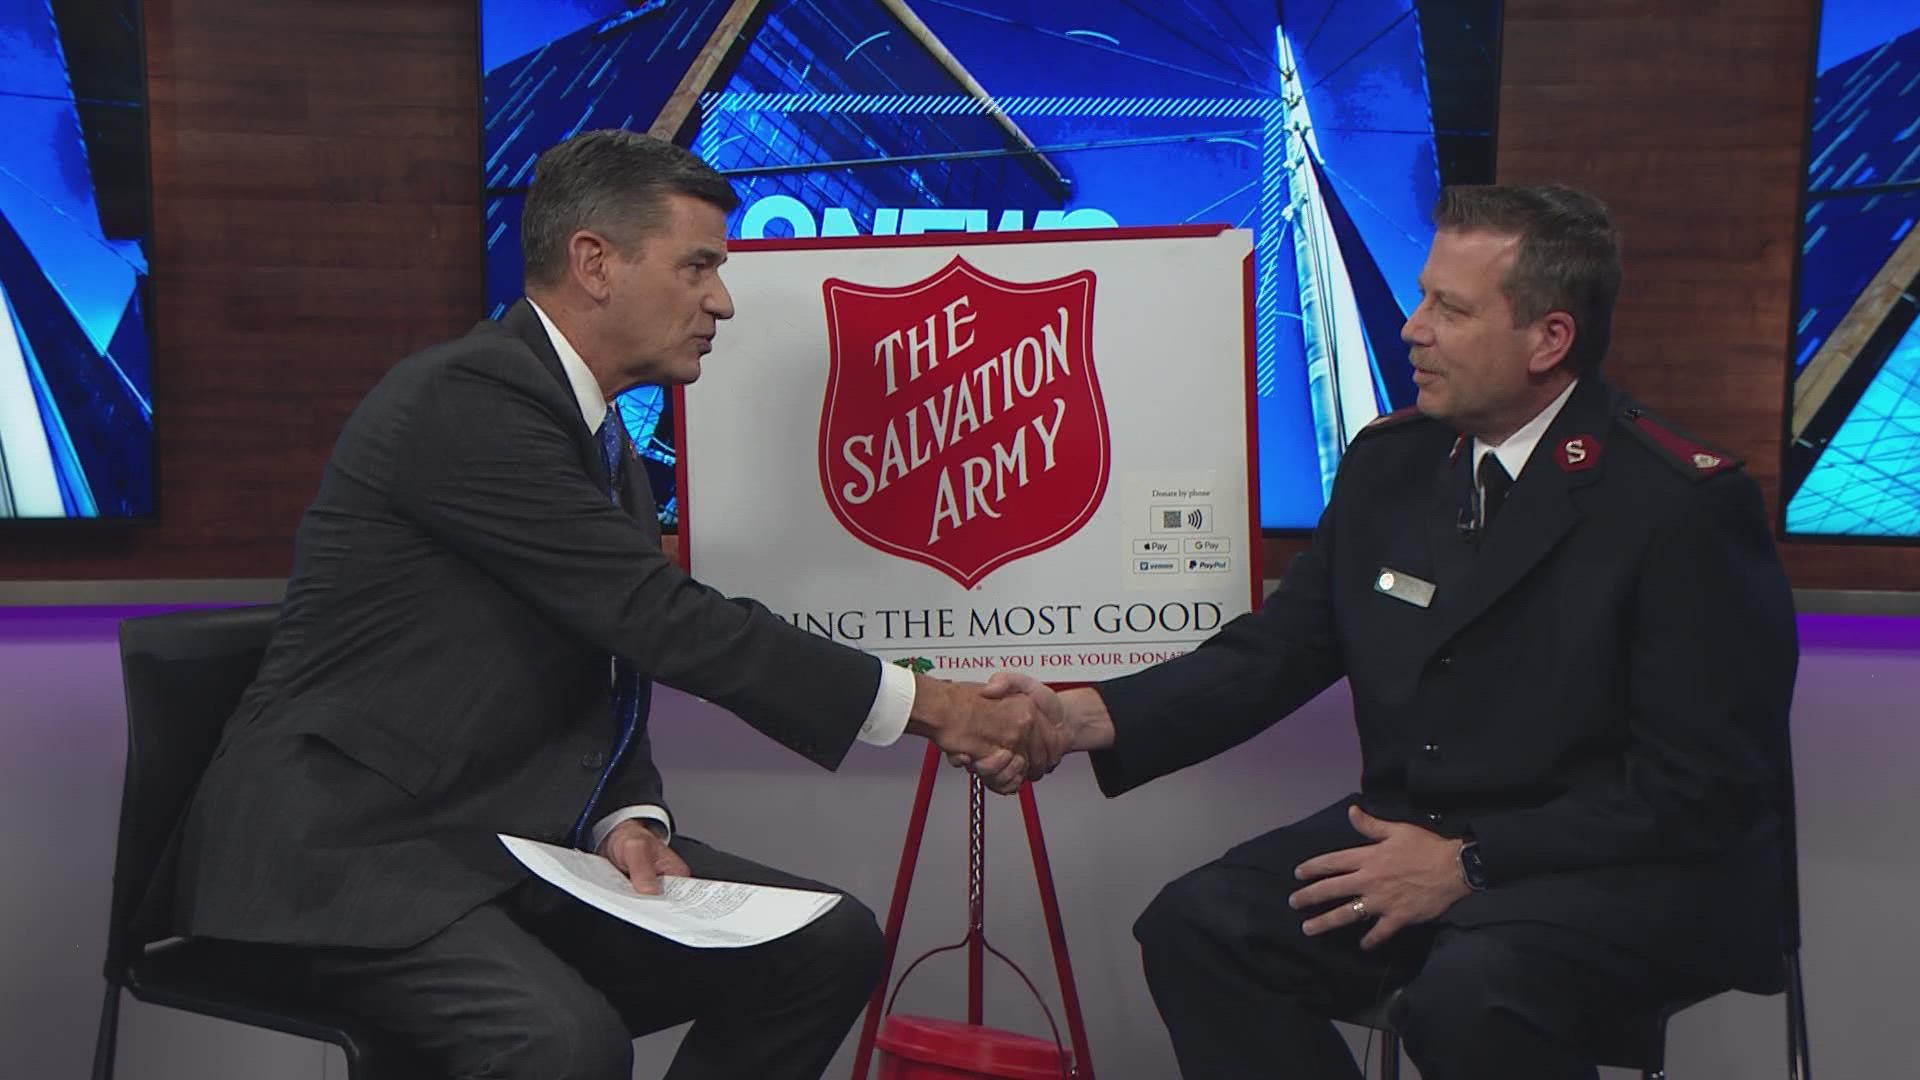 The holidays can be an especially hard time for families struggling. Joining us is Major Richard Pease with the Salvation Army.